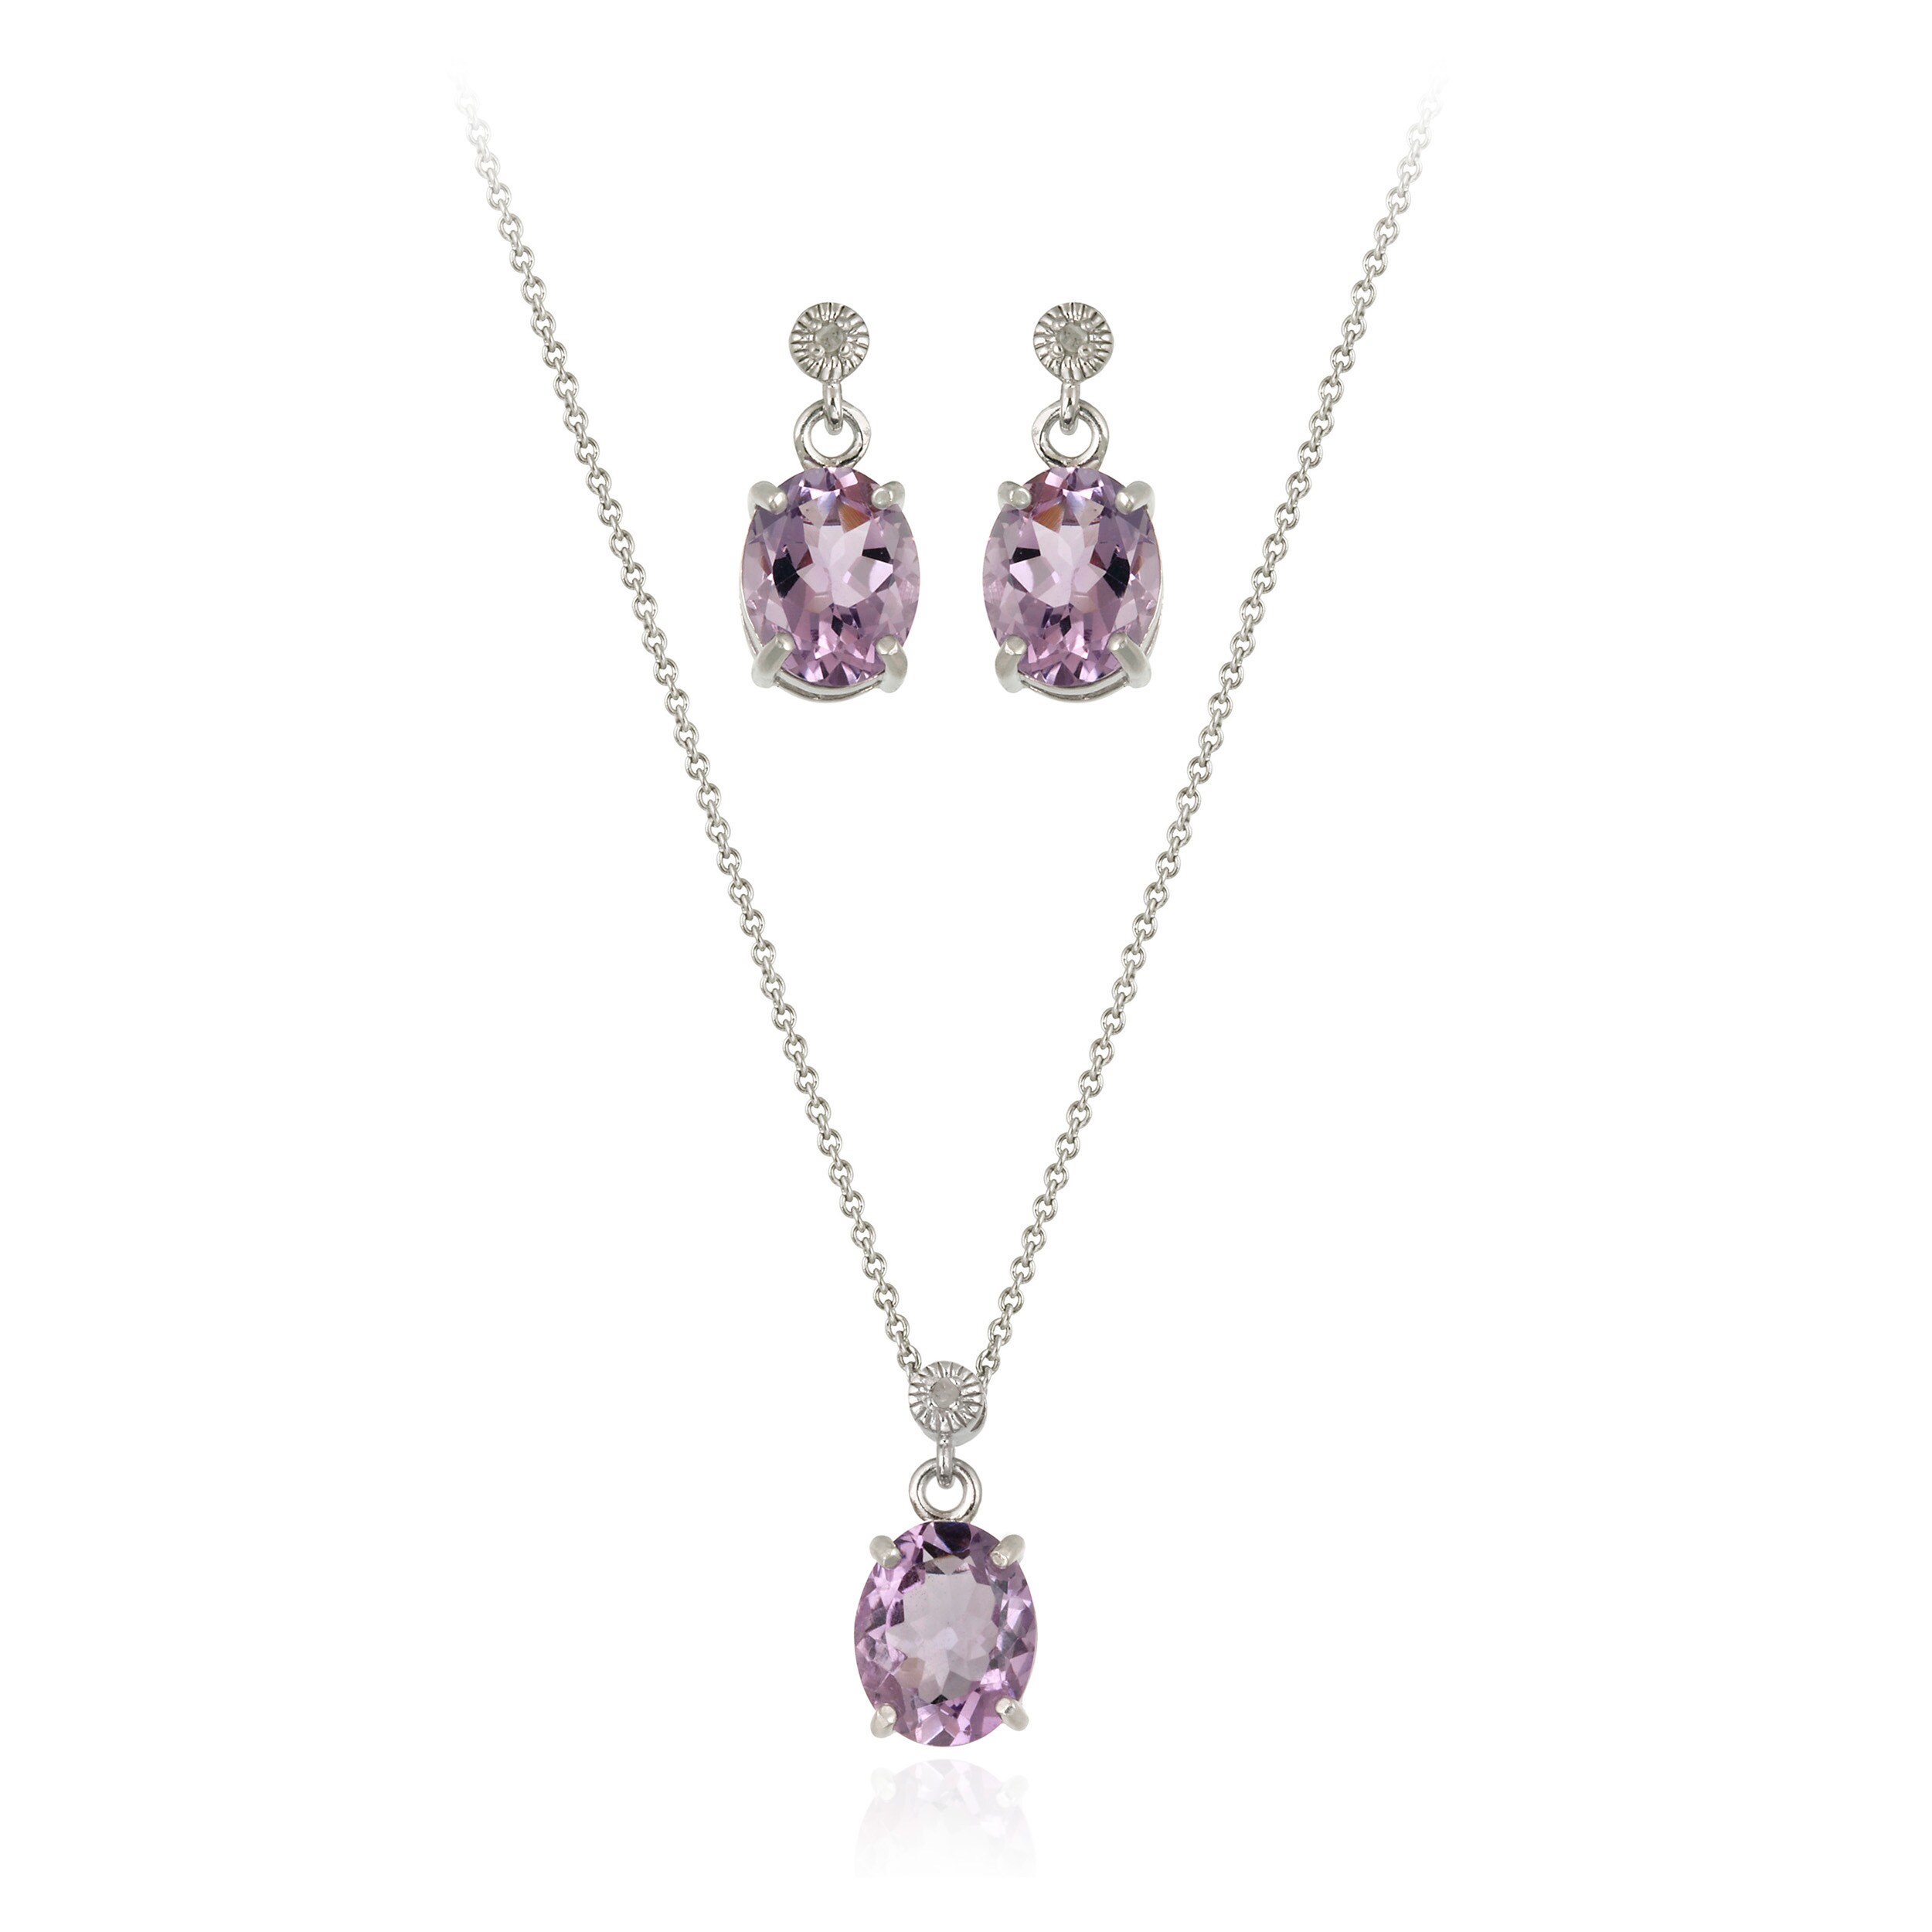 Glitzy Rocks Sterling Silver 7.8 CTW Amethyst Necklace and 